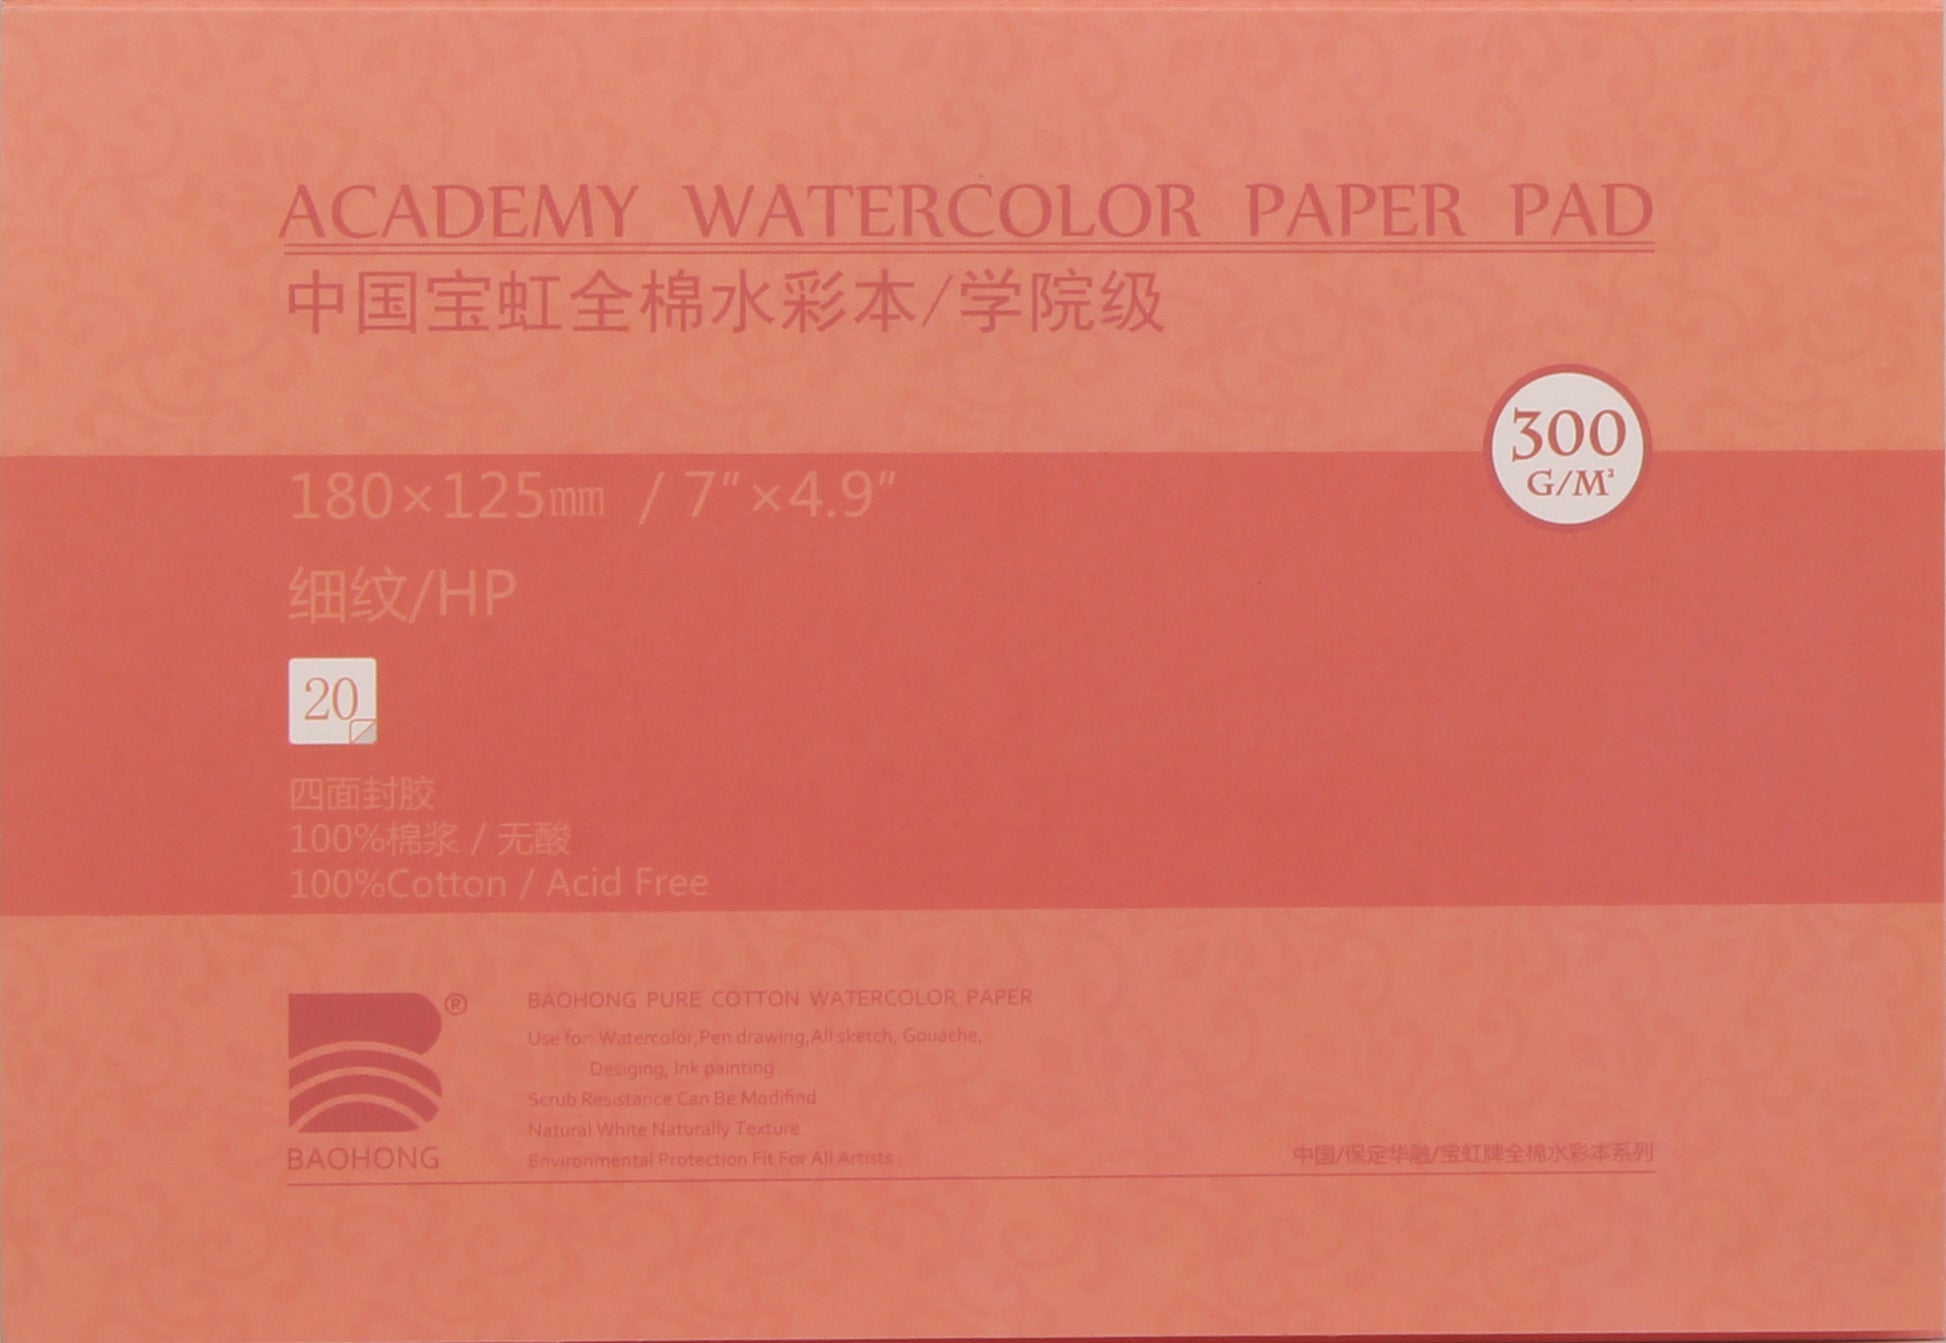 Watercolor Postcards, Baohong Academy Grade Watercolor Paper, 6''x4'', 20  sheets freeshipping - All About Art US – All About Art International, LLC